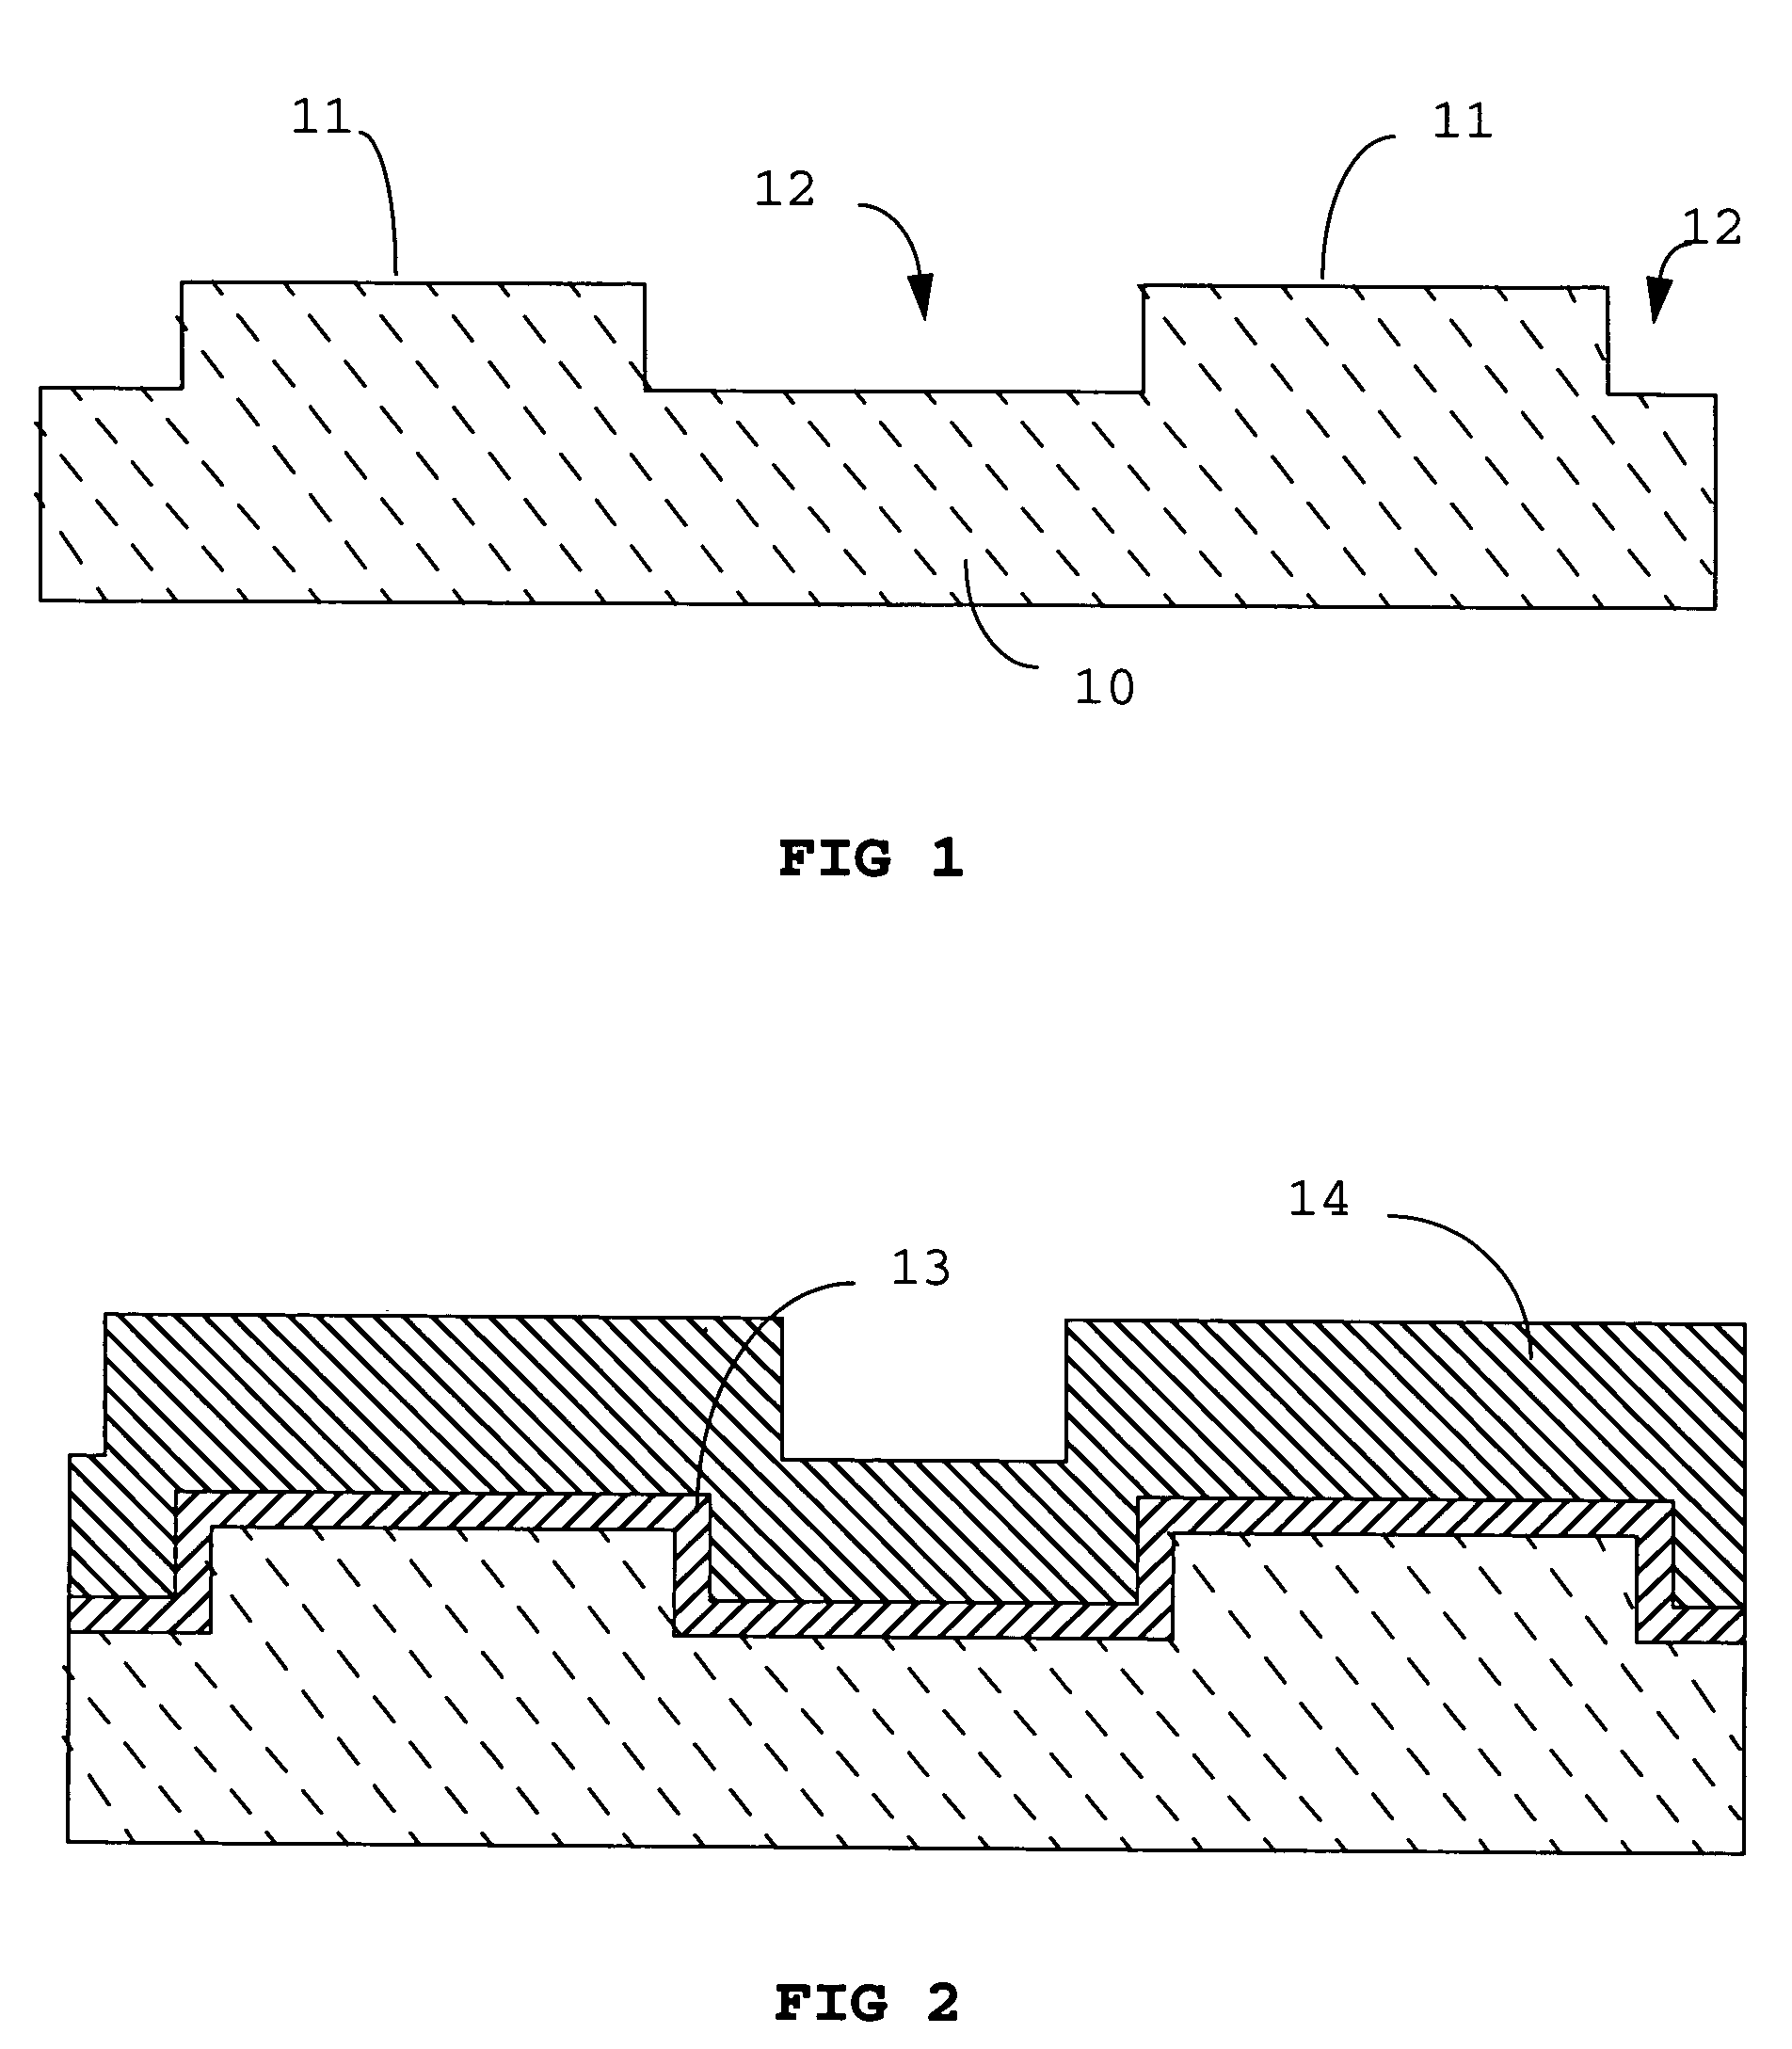 Integrated anneal cap/ ion implant mask/ trench isolation structure for III-V devices